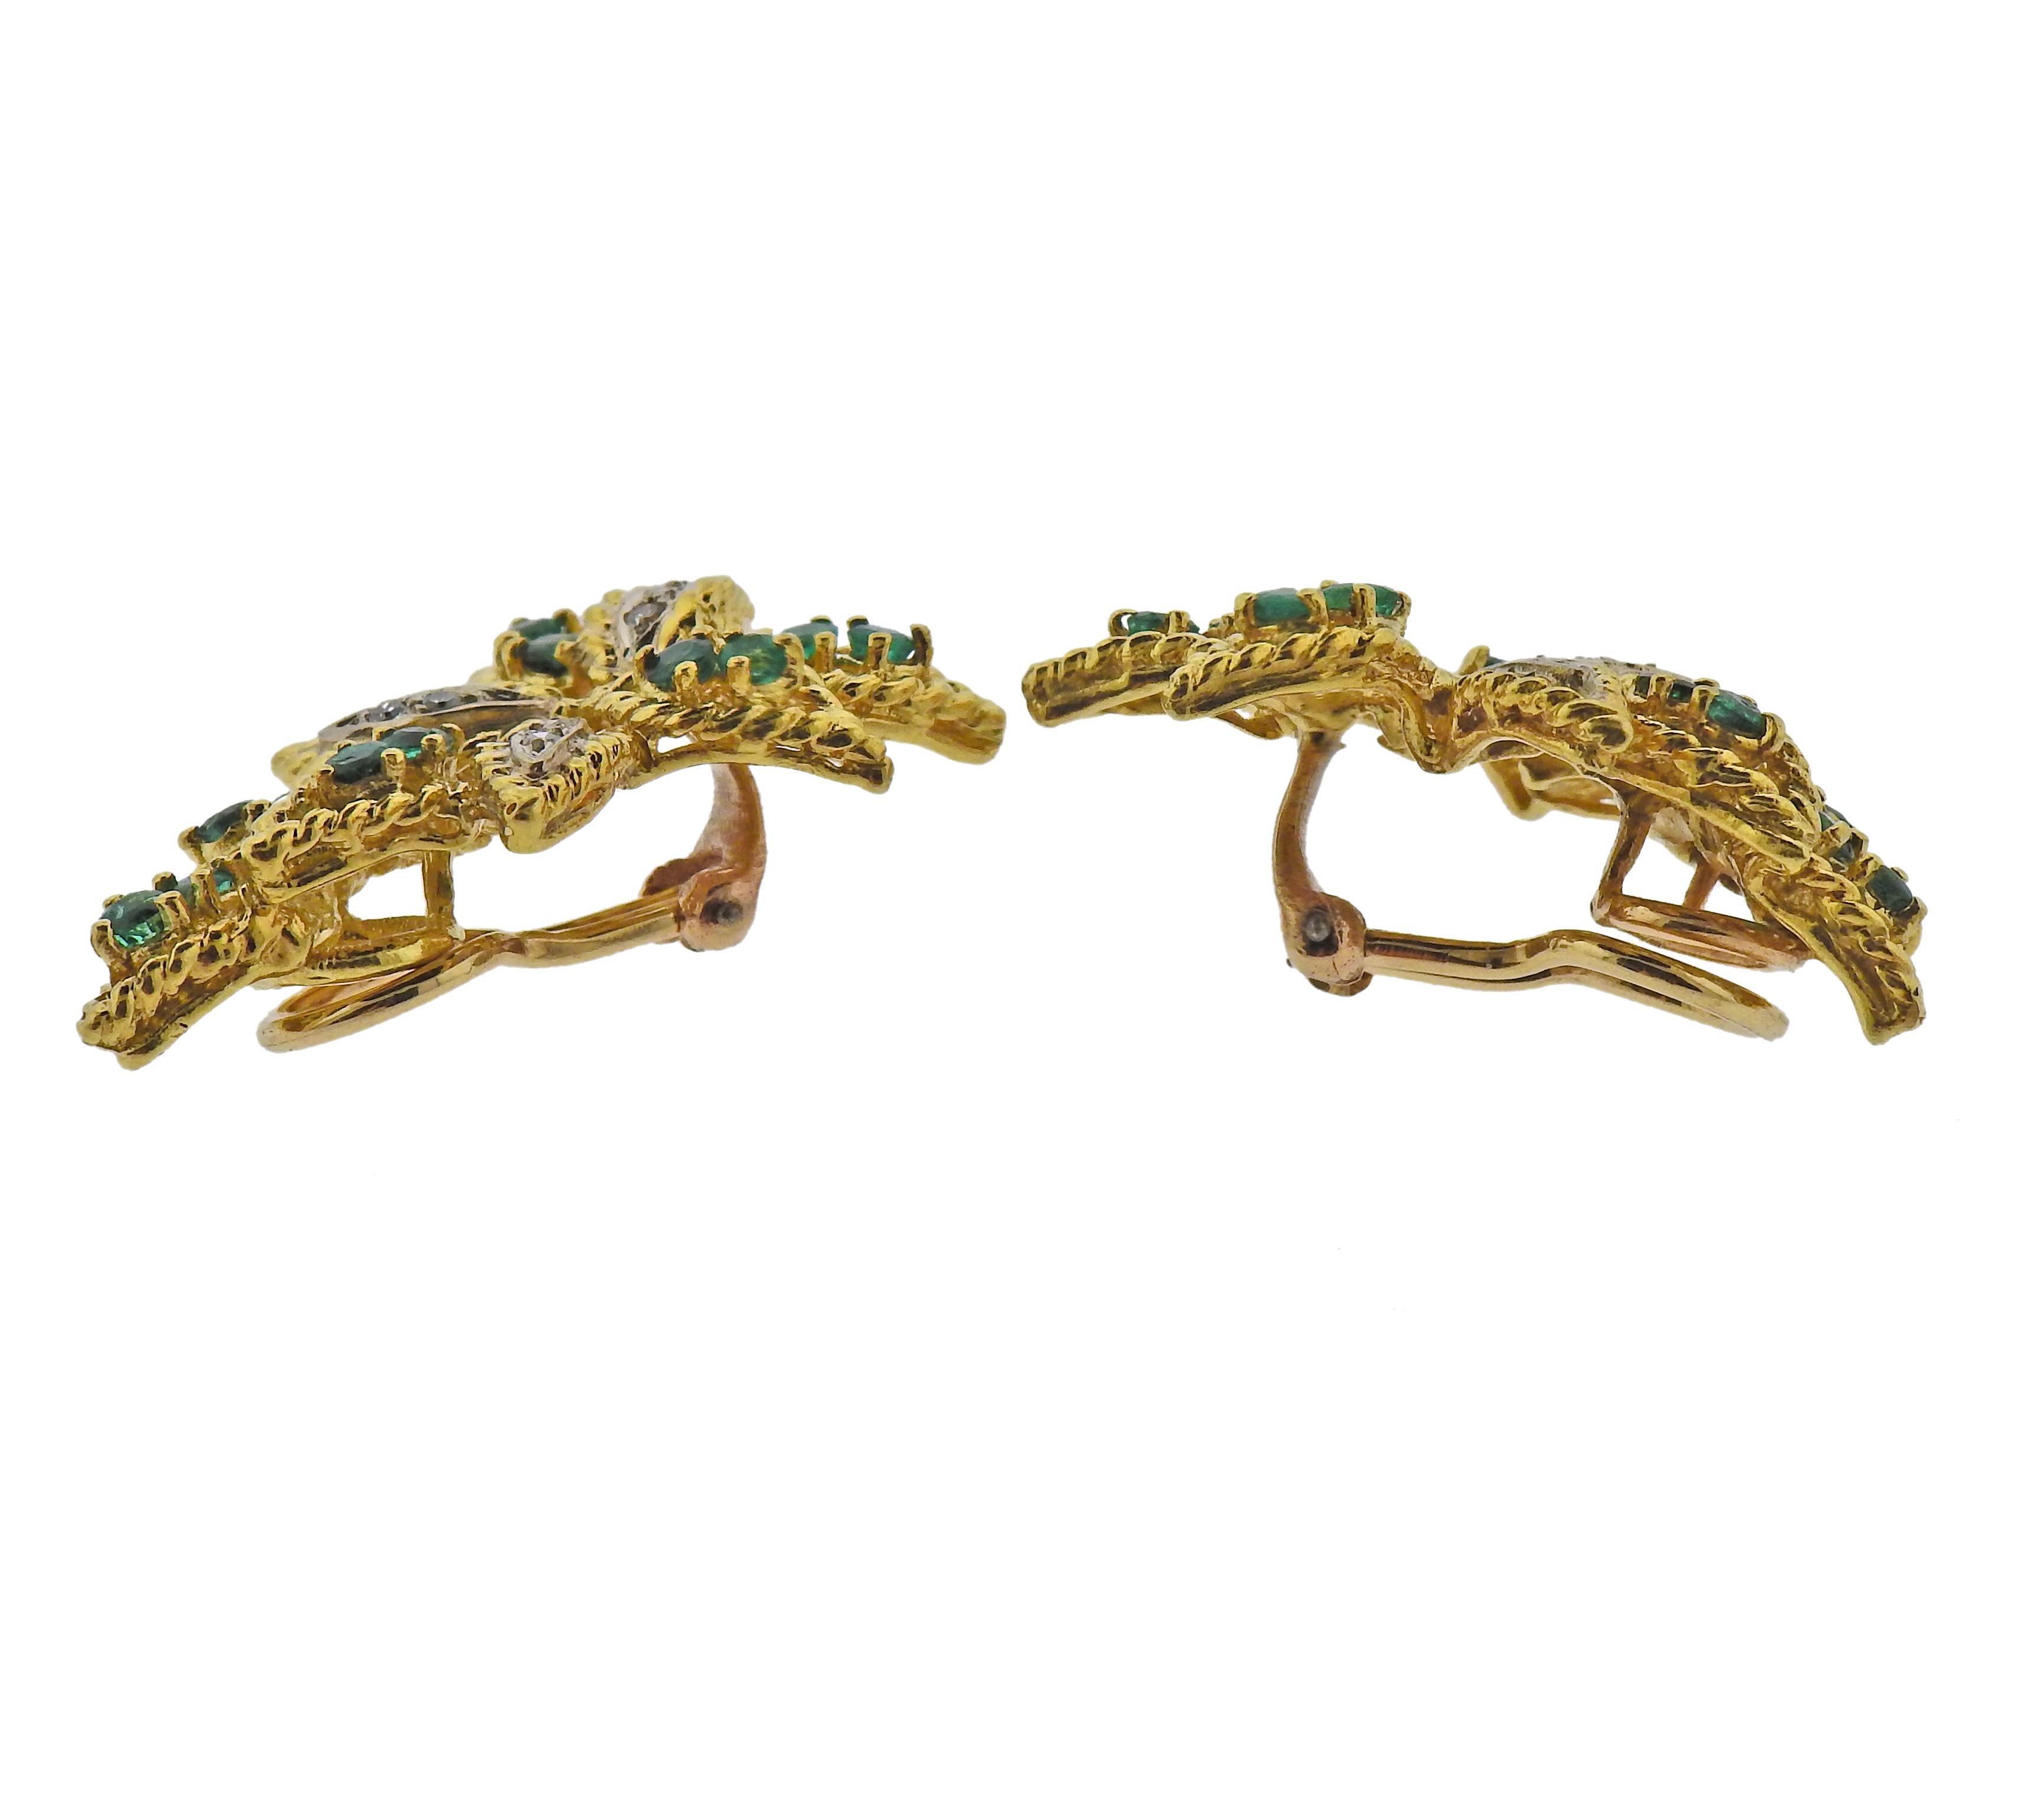 Pair of 18k gold earrings from circa 1970s, with 14k gold backs. Set with emeralds and approx. 0.12ctw in SI/H diamonds. Earrings measure 32mm x 20mm. Weight - 14.3 grams. Marked: 18k on earrings, and 14k on backs.